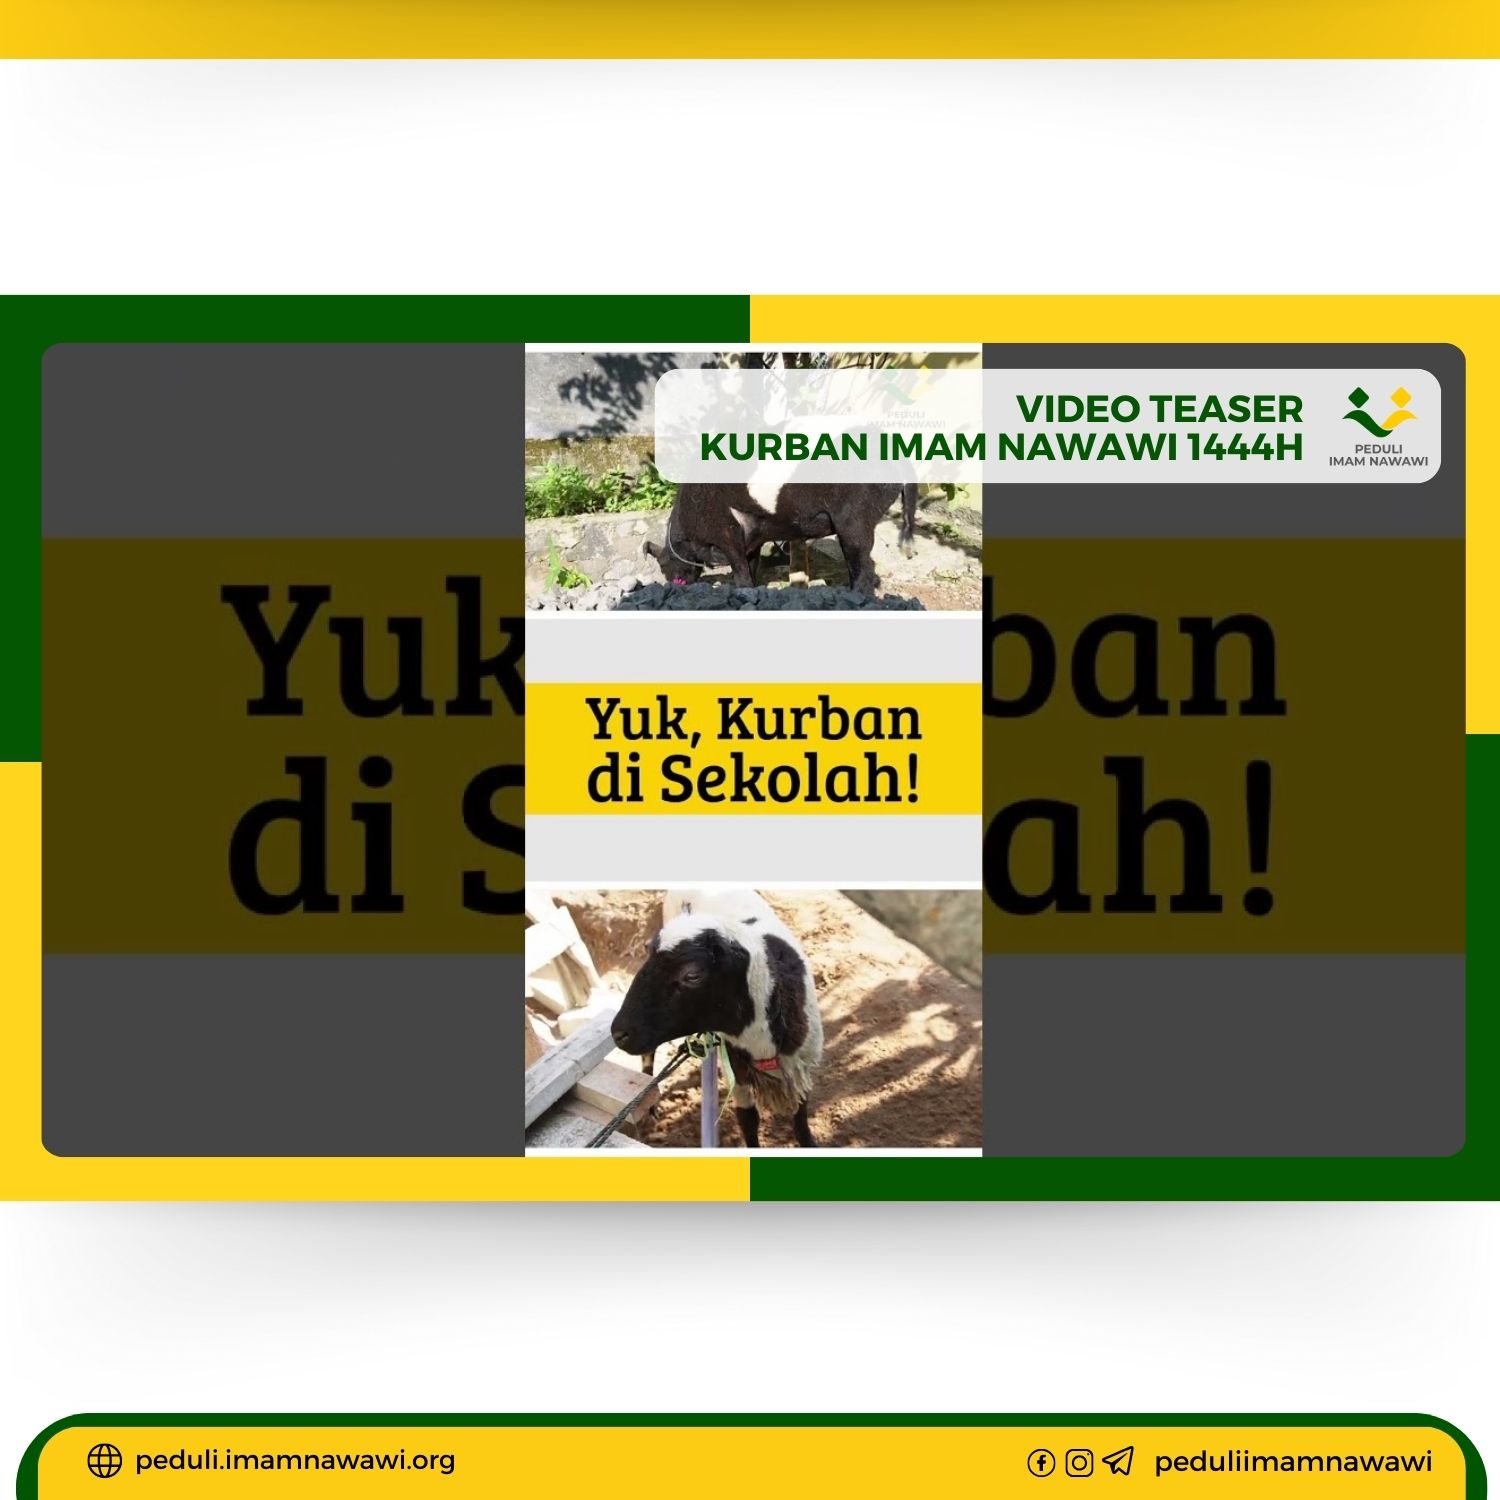 You are currently viewing VIDEO TEASER KURBAN IMAM NAWAWI 1444H